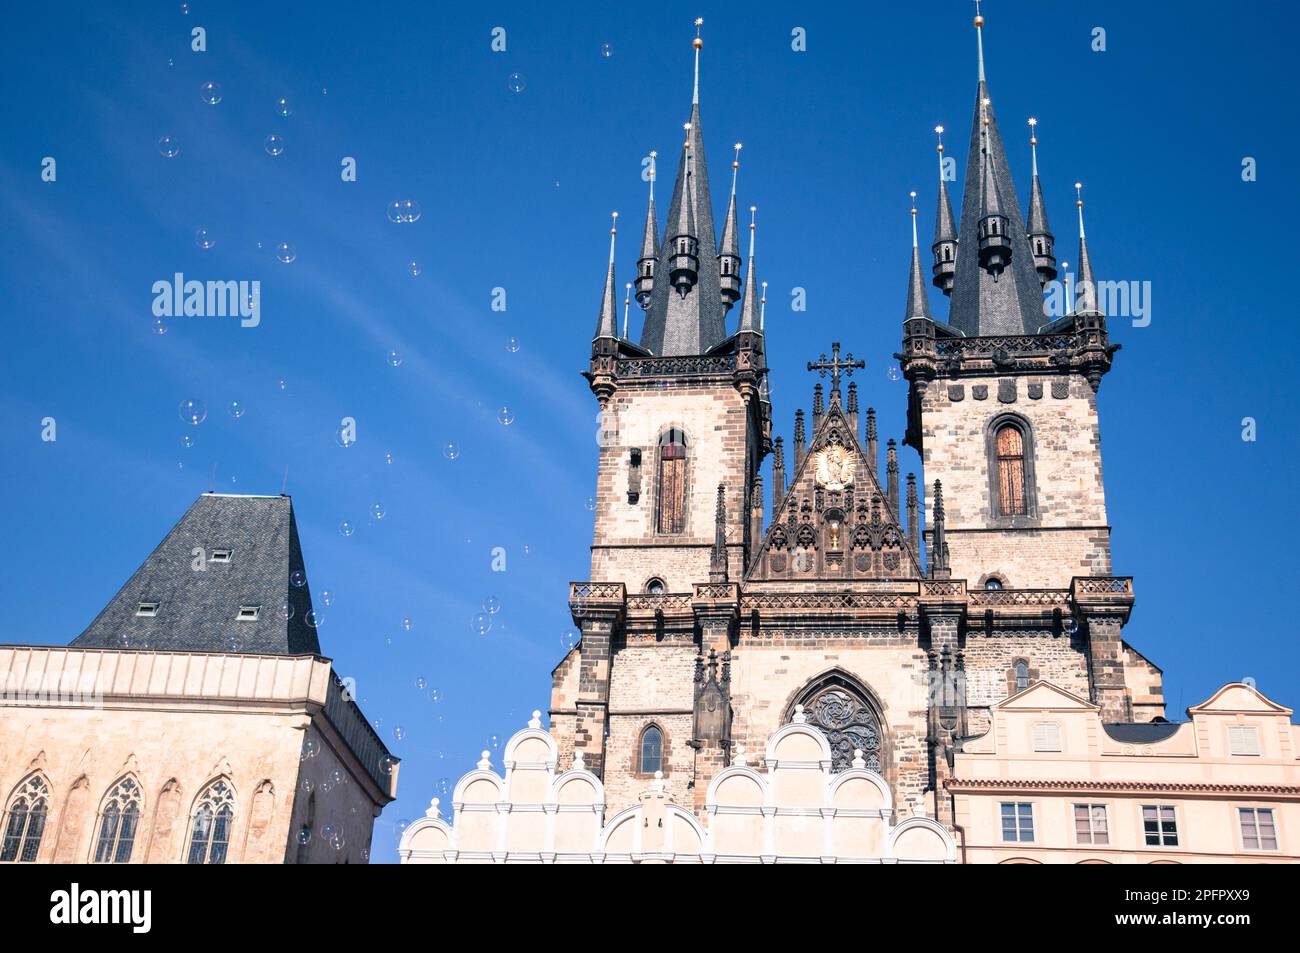 Czech republic, Prague. Political and cultural center of Bohemia and the Czech state. Credits: Andrea Pinna Stock Photo